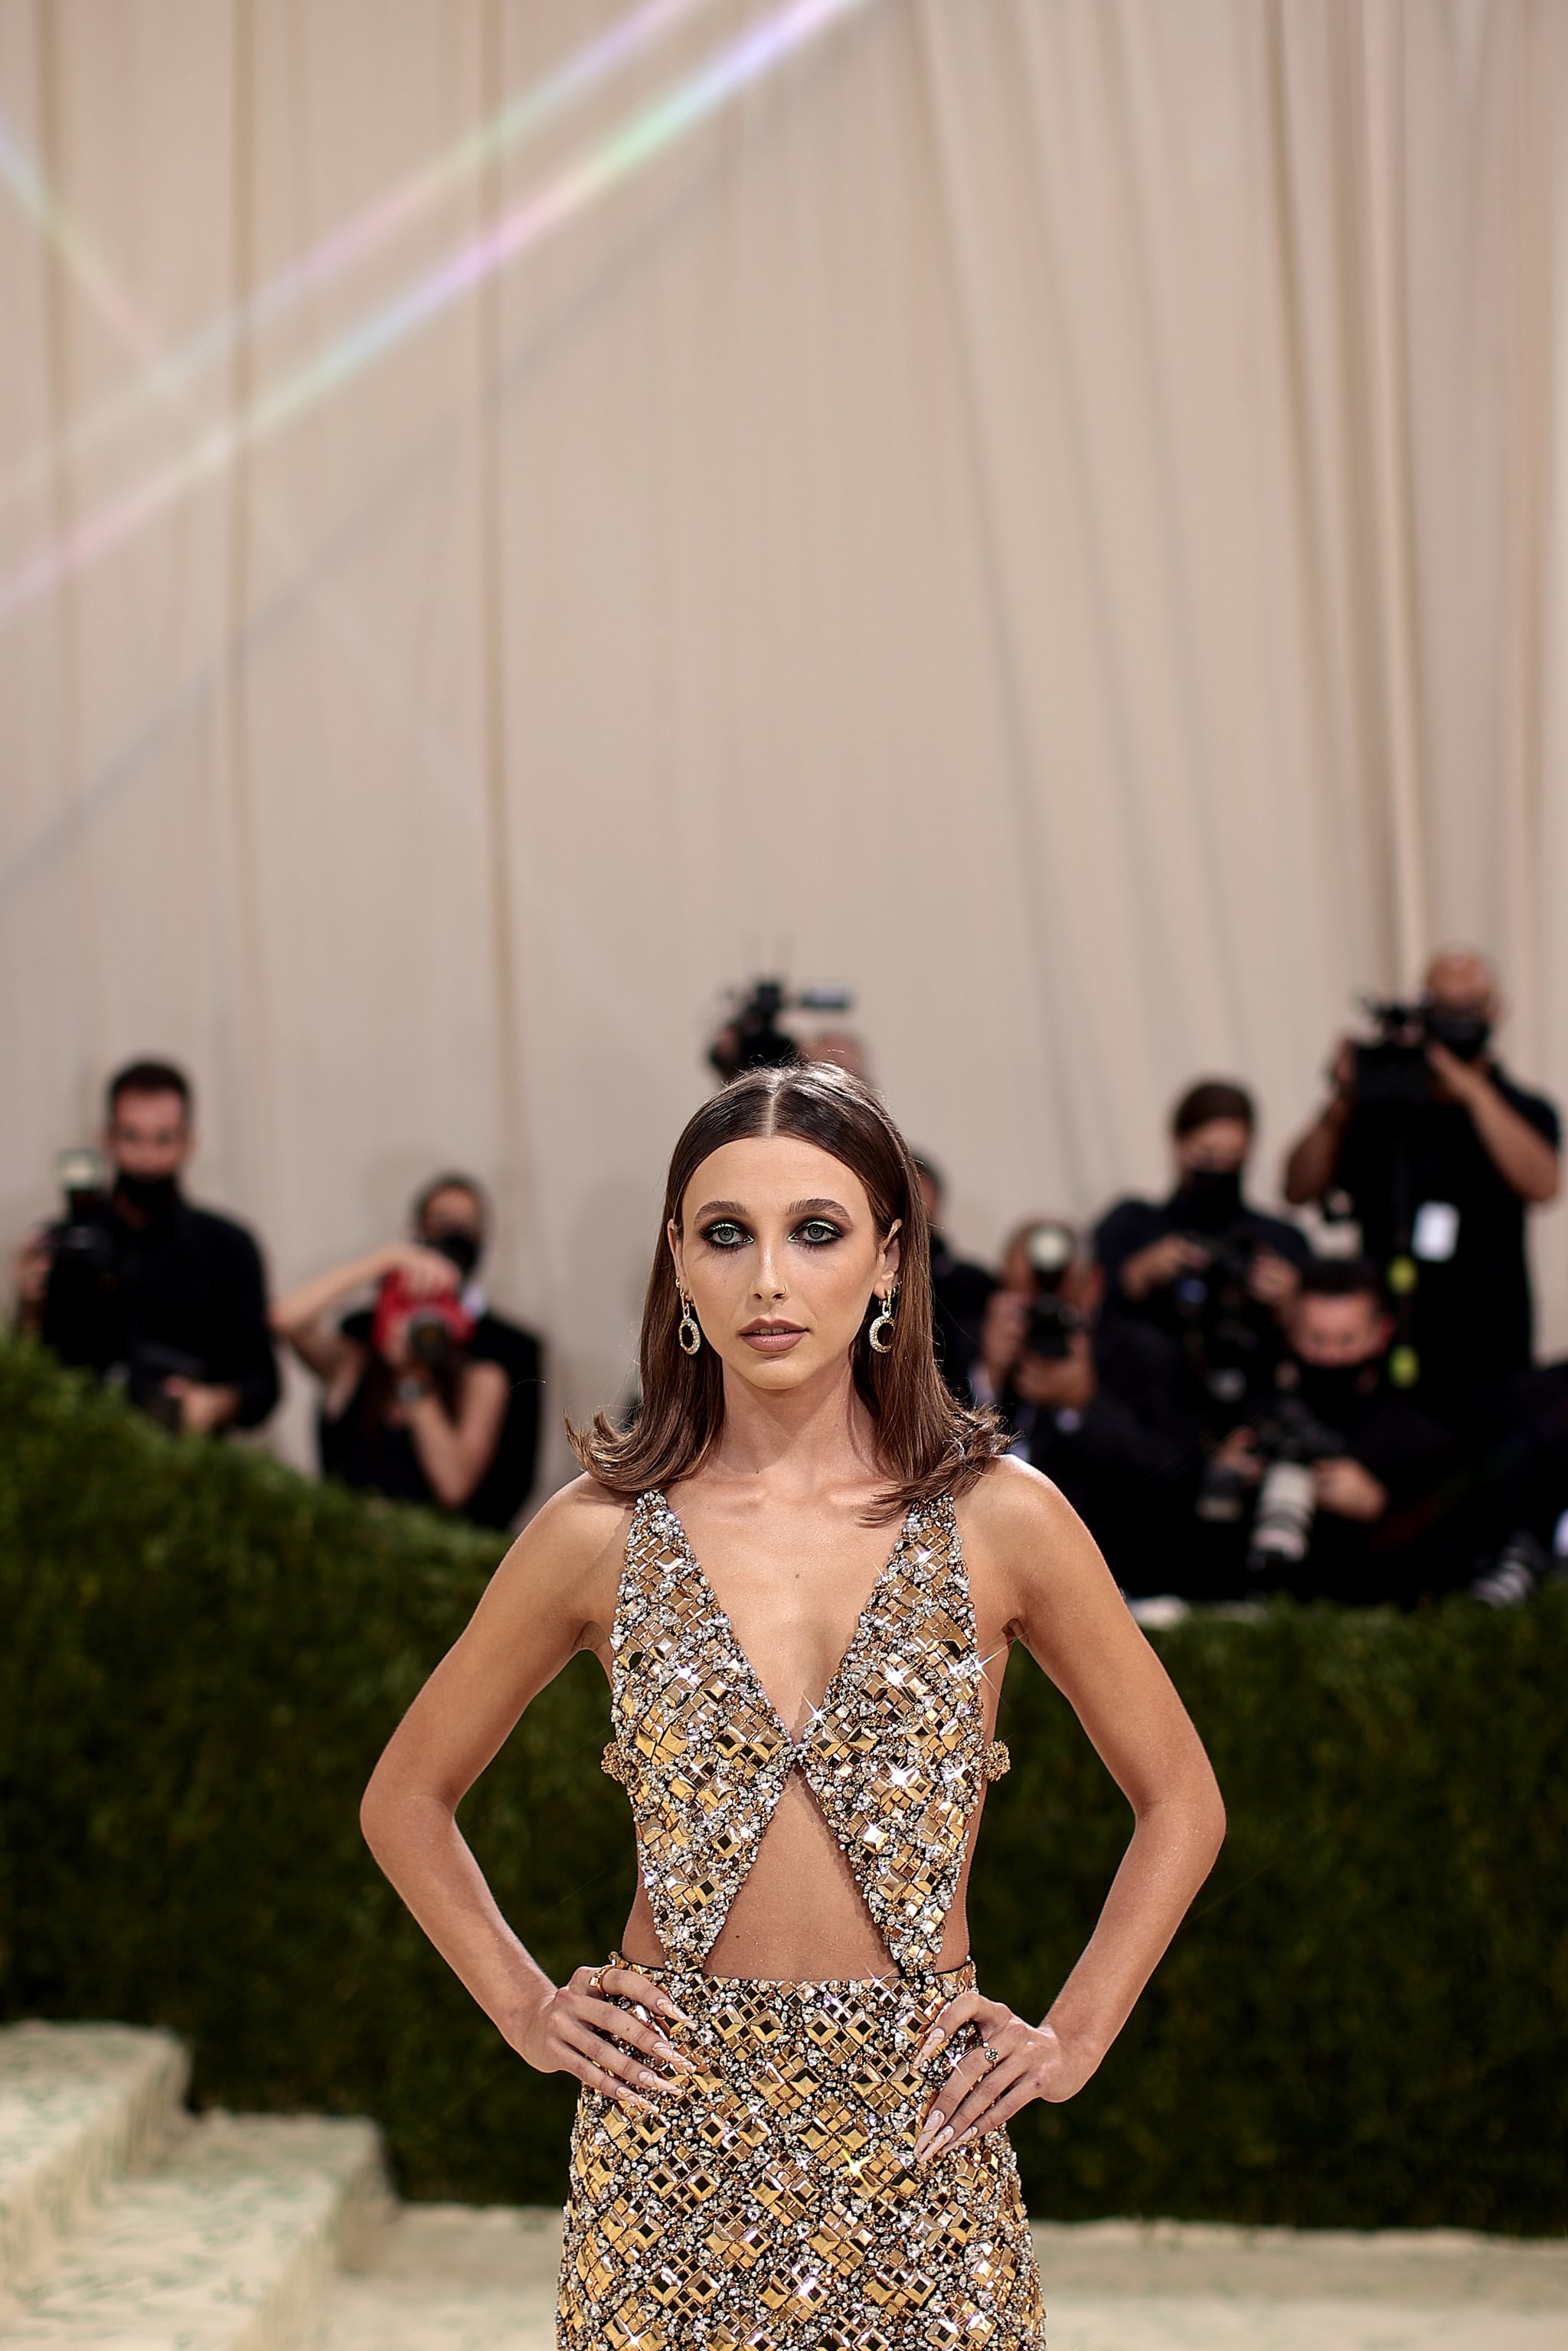 Emma Chamberlain News Updates on X: Sure, Emma Chamberlain's Louis Vuitton  #MetGala outfit was fire, but watch Emma single-handedly start this new Met  Gala after-party tradition of all the guests changing into